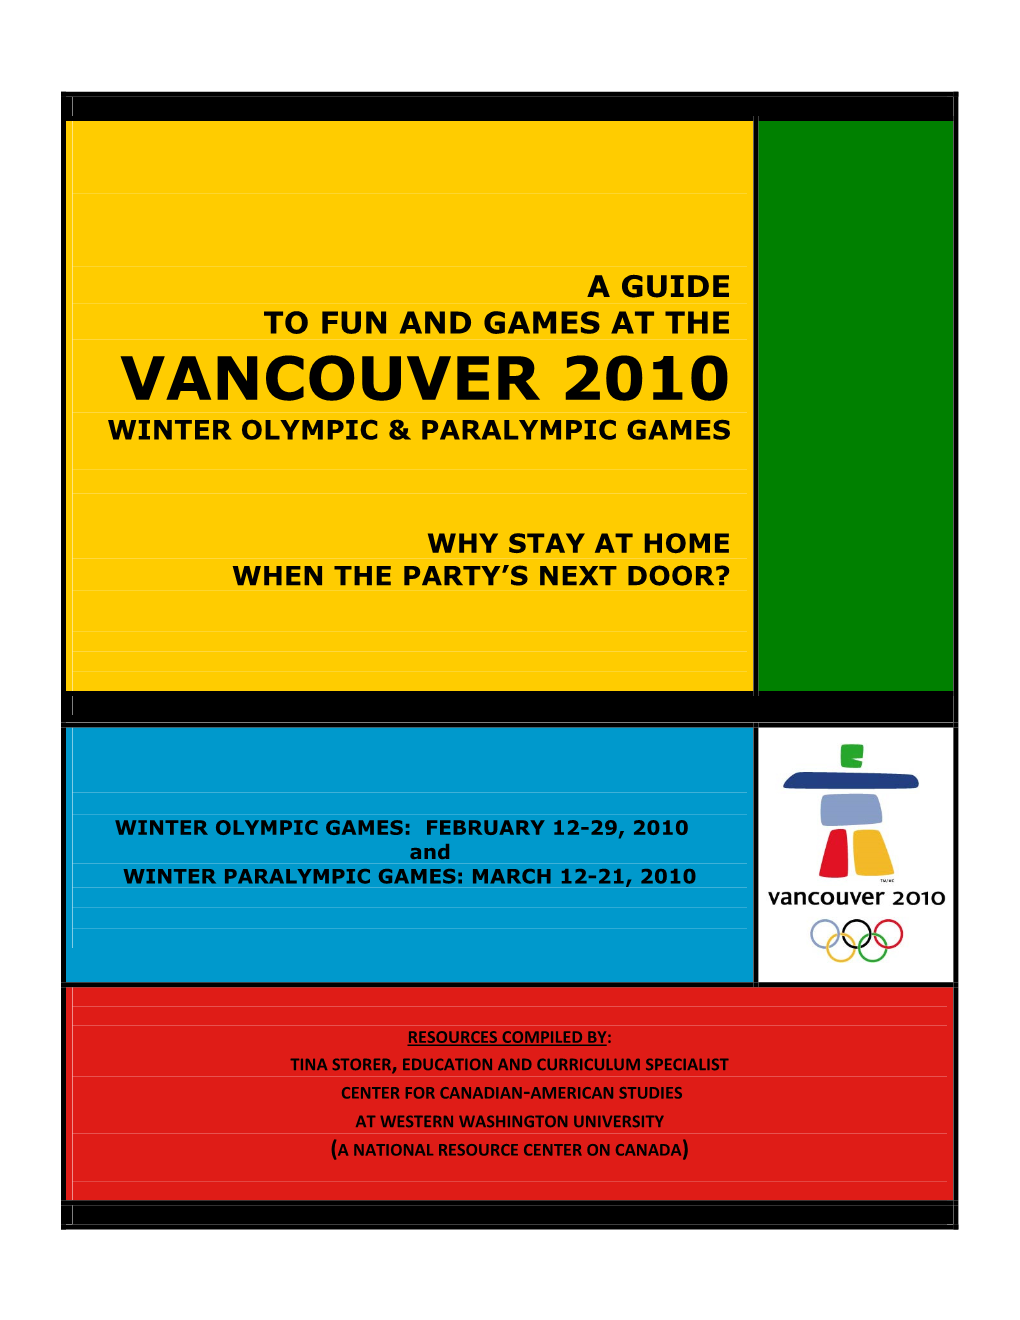 Vancouver 2010 Winter Olympic & Paralympic Games